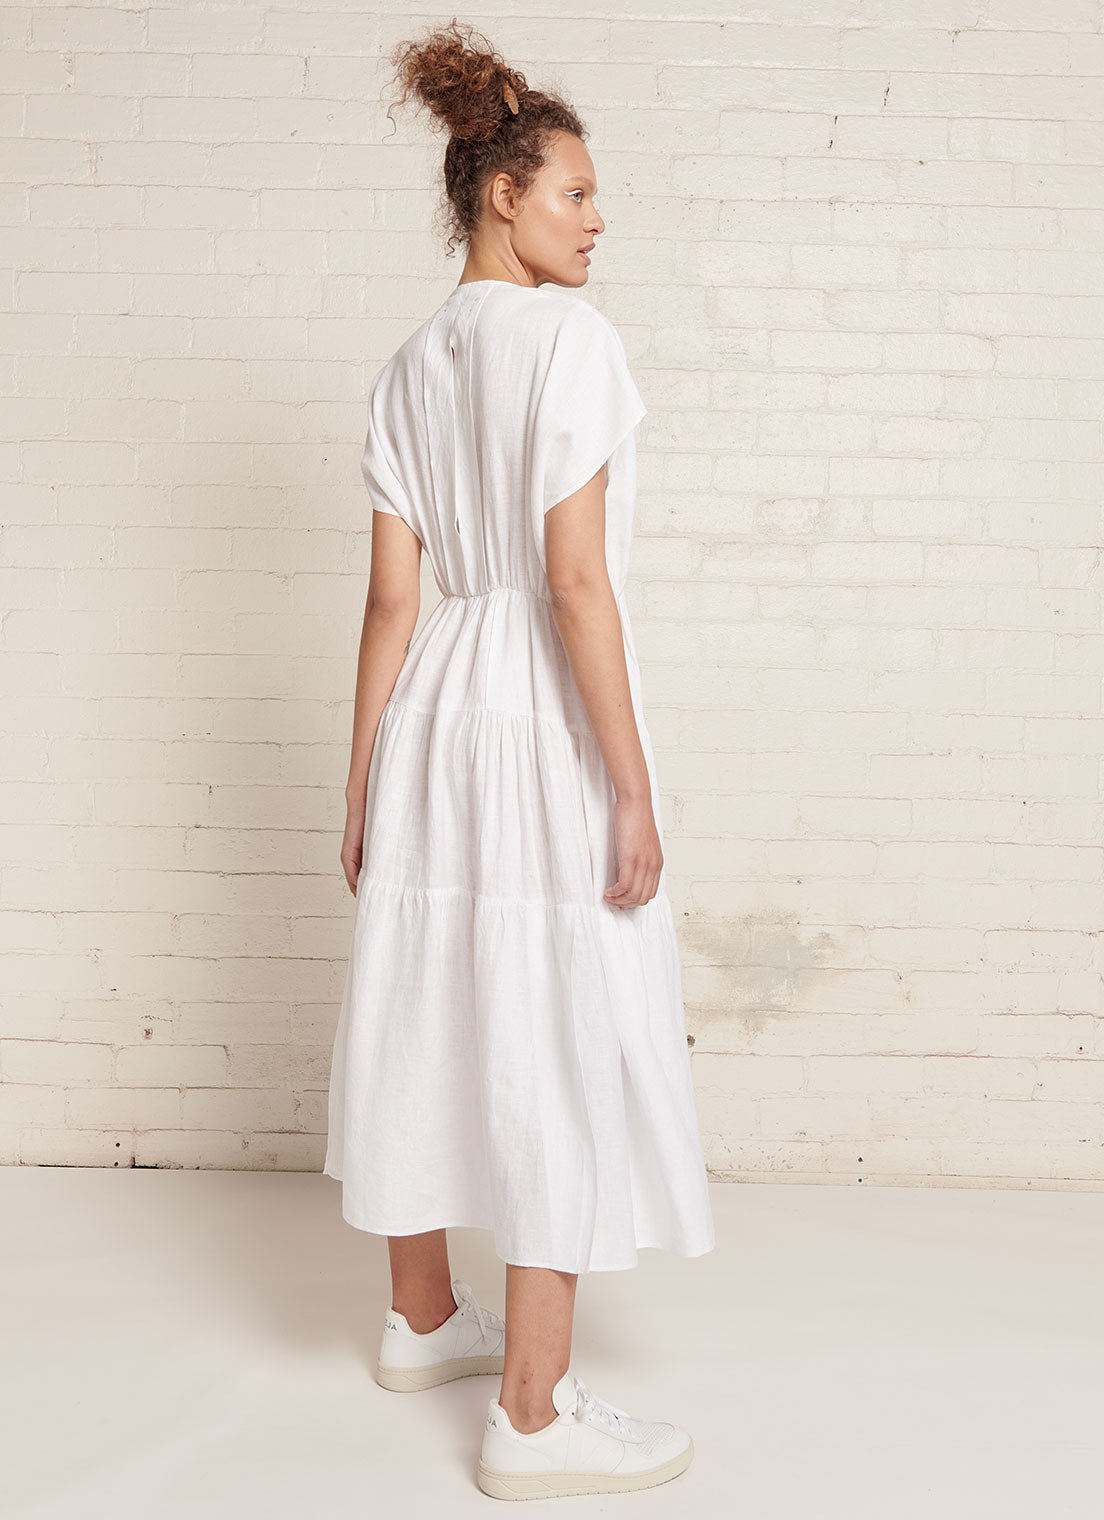 An white, midi tiered dress with capped sleeves, pleated detail on the neckline and at the back, elastic waist and slits on the skirt made from yarn dye washed linen